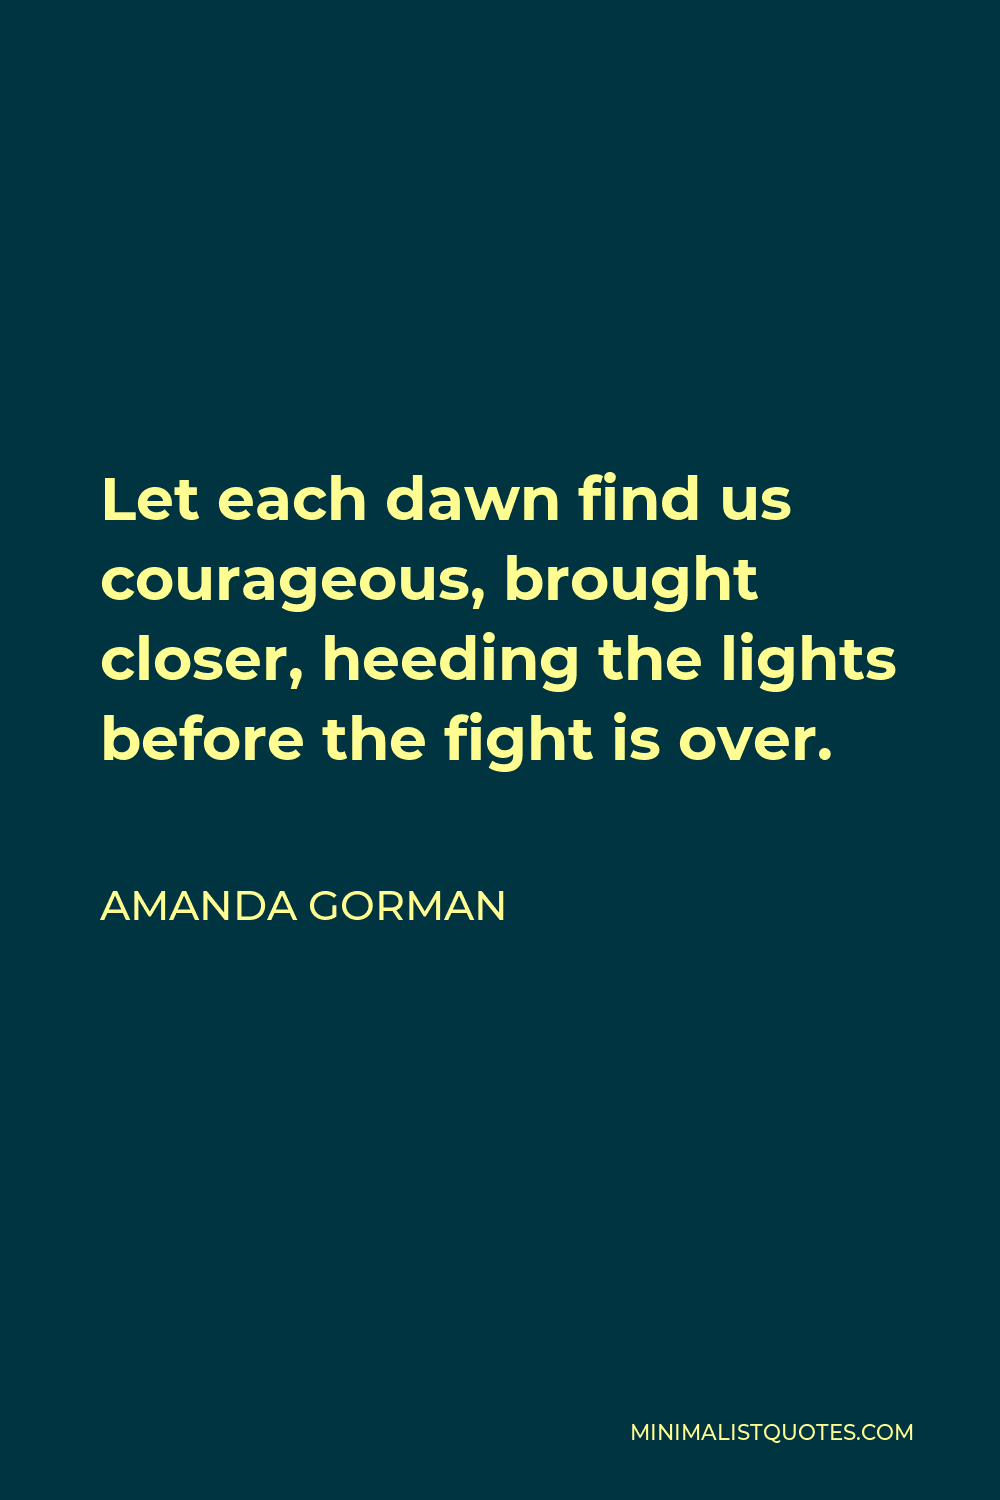 Amanda Gorman Quote - Let each dawn find us courageous, brought closer, heeding the lights before the fight is over.